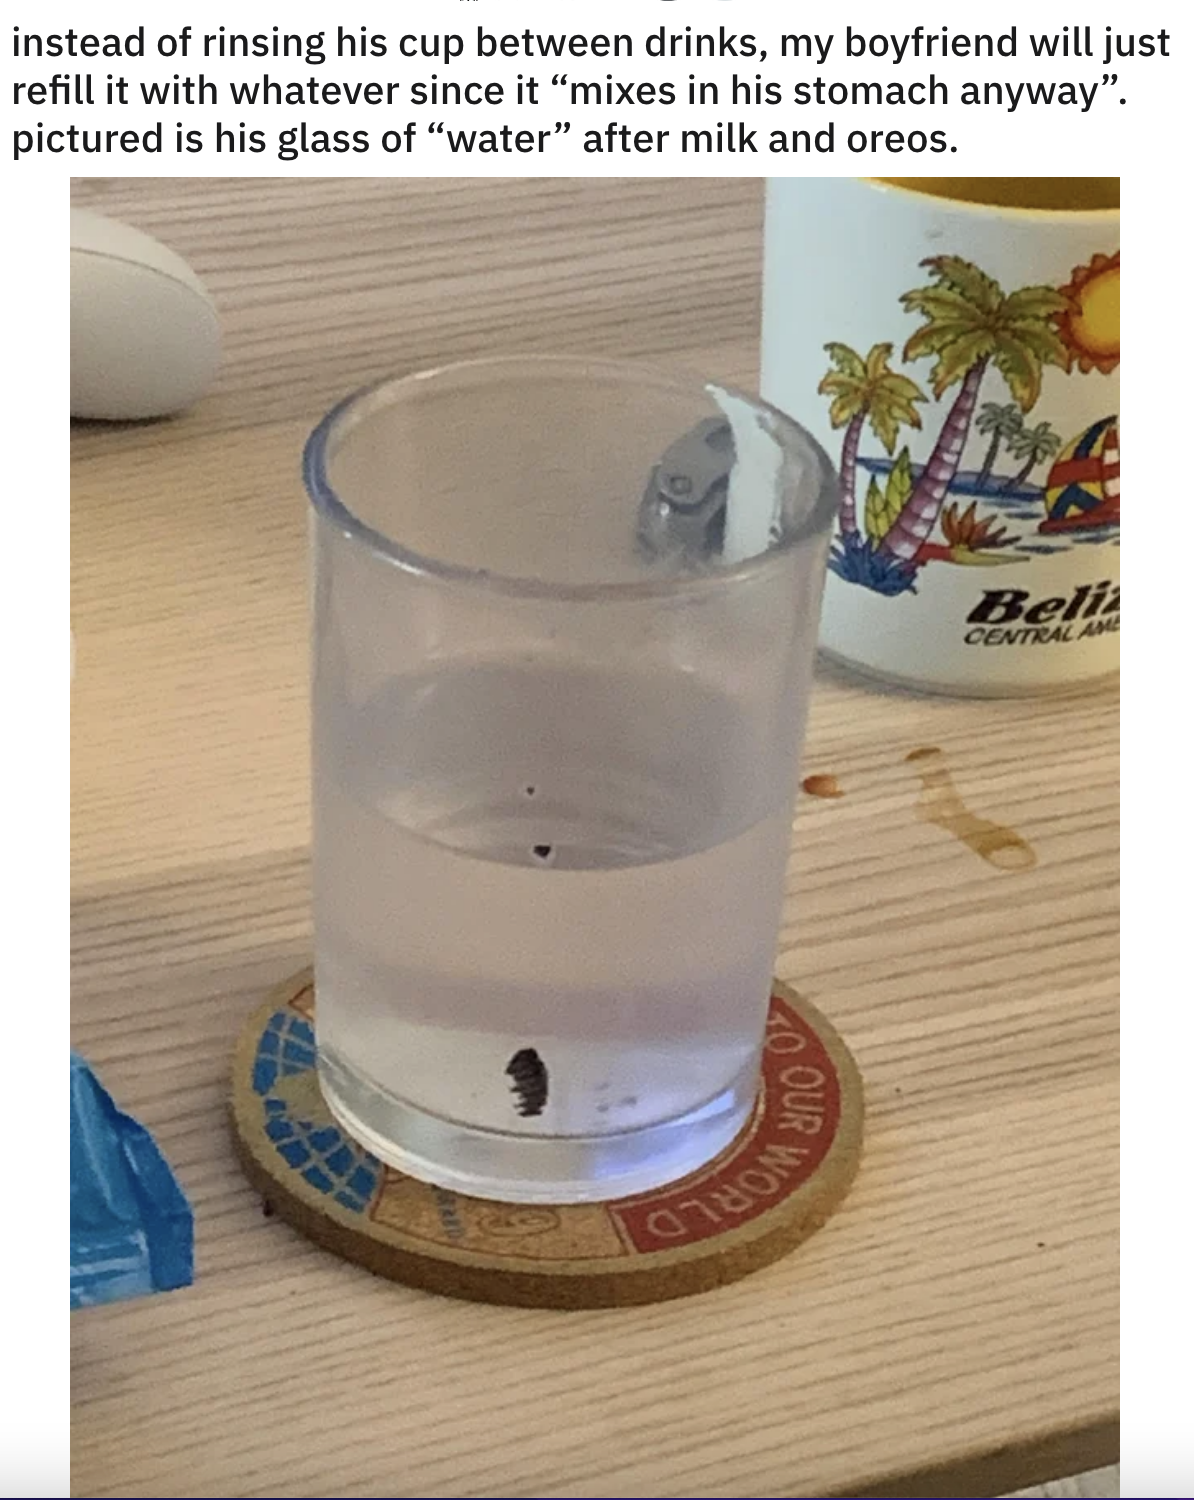 Boyfriend&#x27;s cloudy glass of water with food debris on the side because he doesn&#x27;t wash it between drinks, since &quot;it all mixes in his stomach anyway&quot;